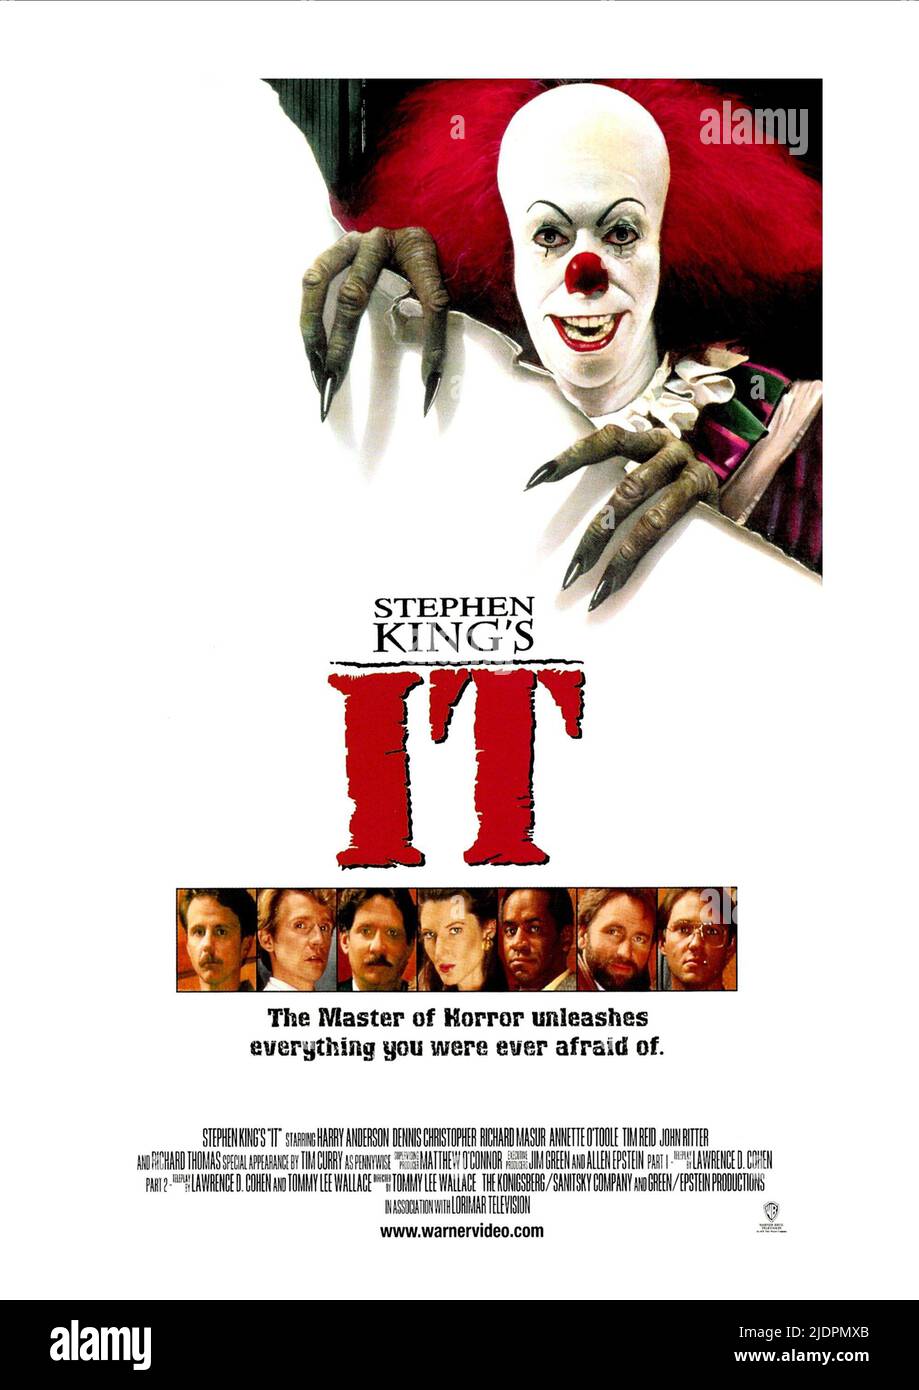 CURRY,ANDERSON,CHRISTOPHER,MASUR,O'TOOLE,REID,RITTER,POSTER, STEPHEN KING'S IT, 1990 Stock Photo